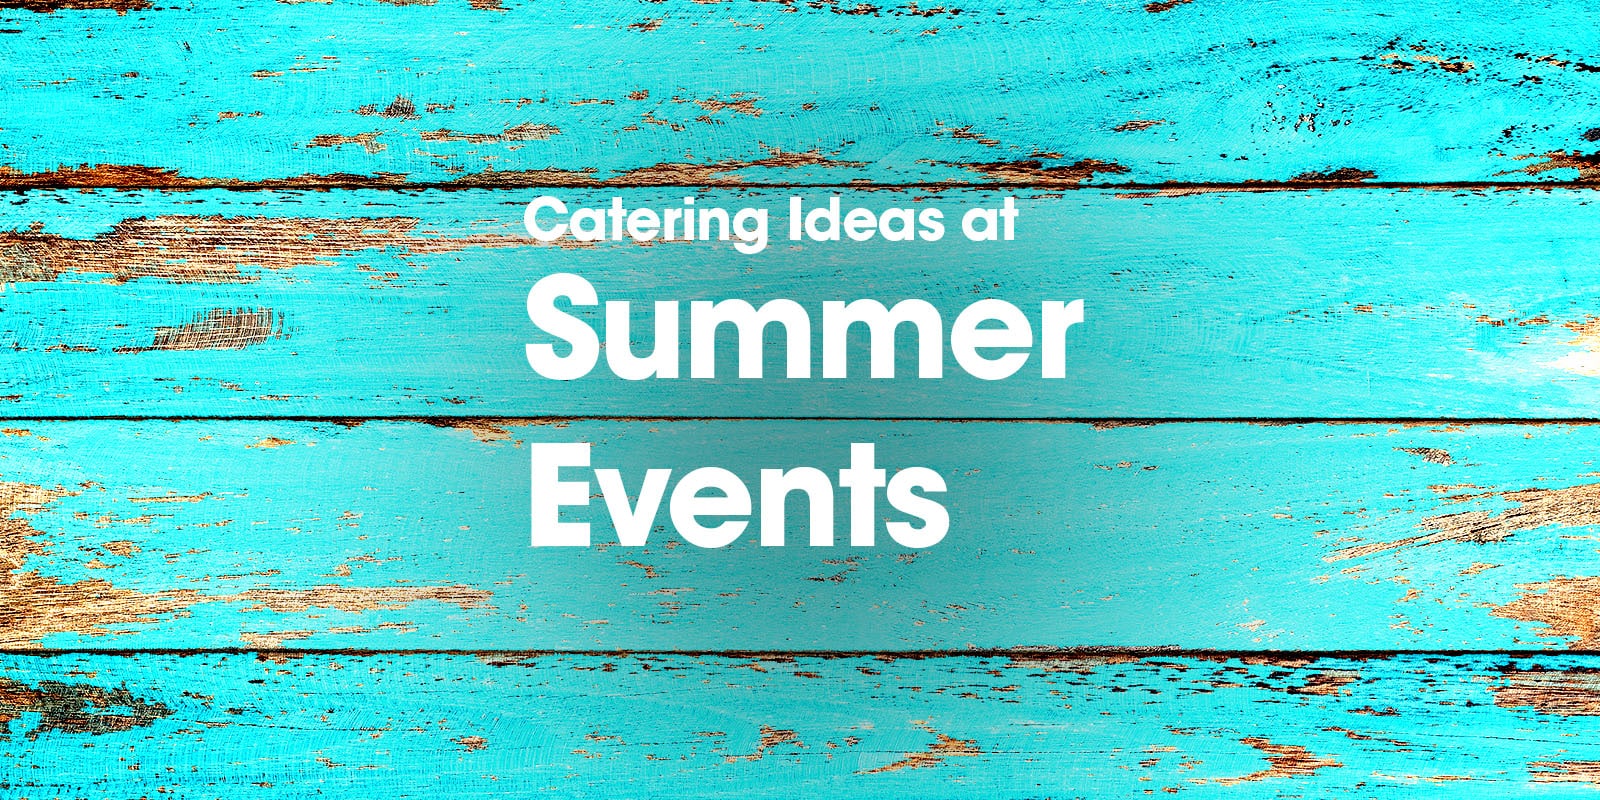 event-management-food-ideas-catering